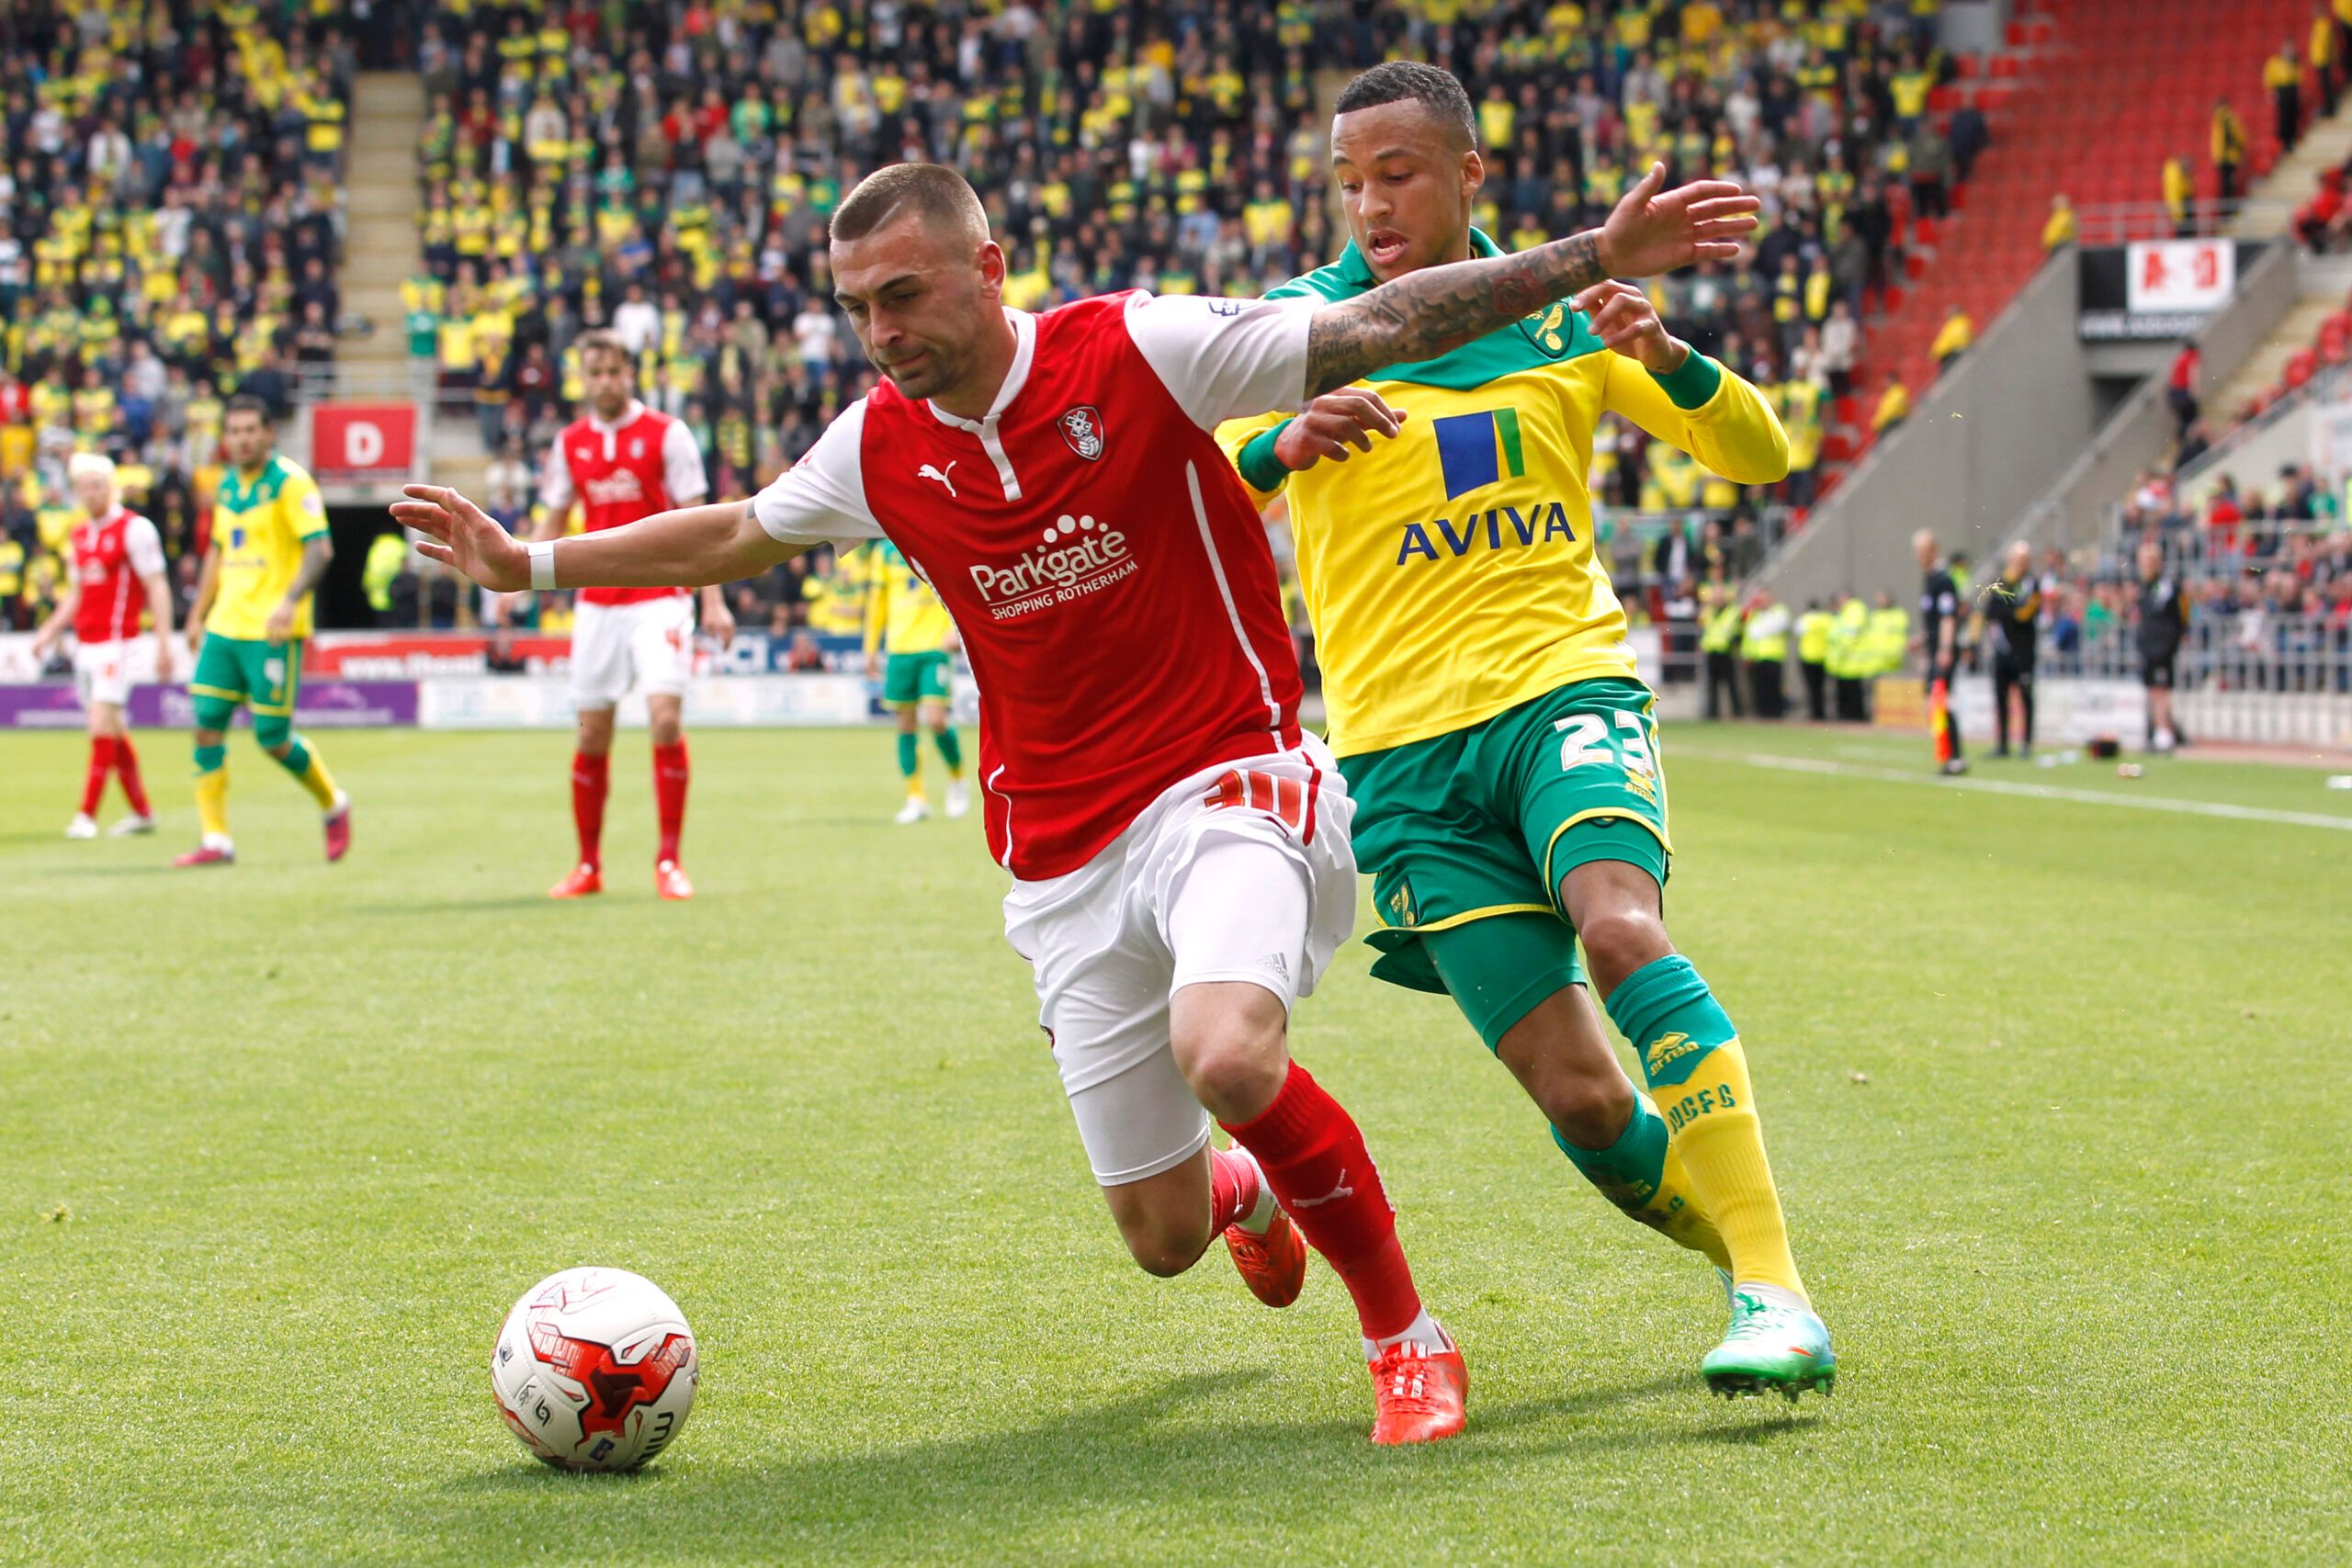 Football - Rotherham United v Norwich City - Sky Bet Football League Championship - AESSEAL New York Stadium - 14/15 - 25/4/15 
Rotherham United's Jack Hunt in action against Norwich City's Martin Olsson  
Mandatory Credit: Action Images / John Clifton 
EDITORIAL USE ONLY. No use with unauthorized audio, video, data, fixture lists, club/league logos or 